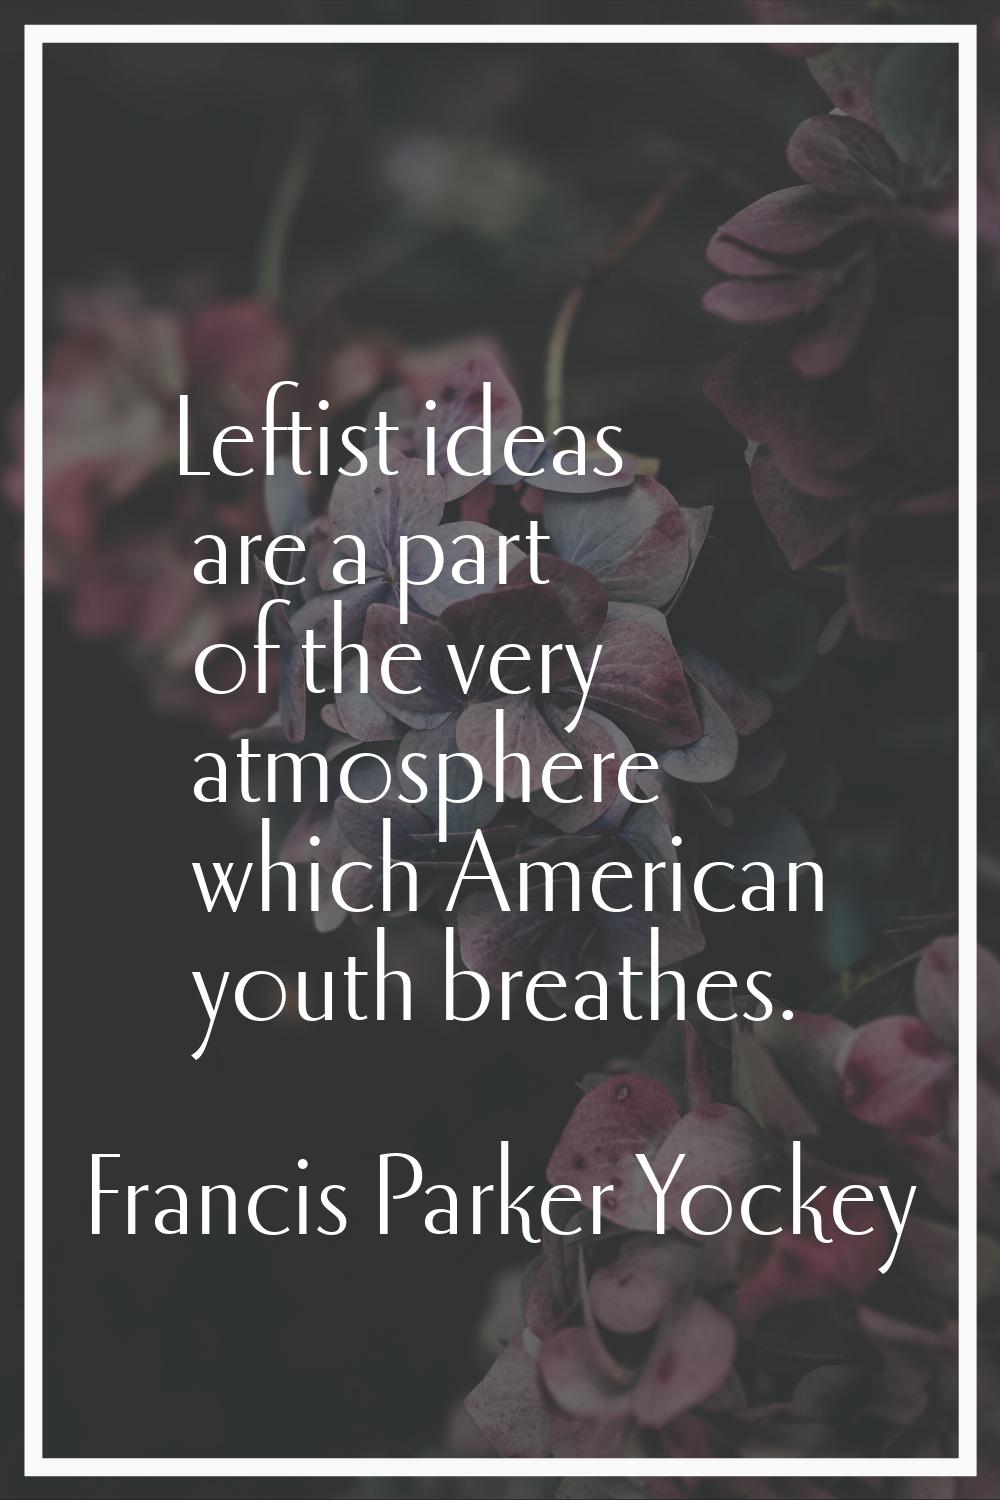 Leftist ideas are a part of the very atmosphere which American youth breathes.